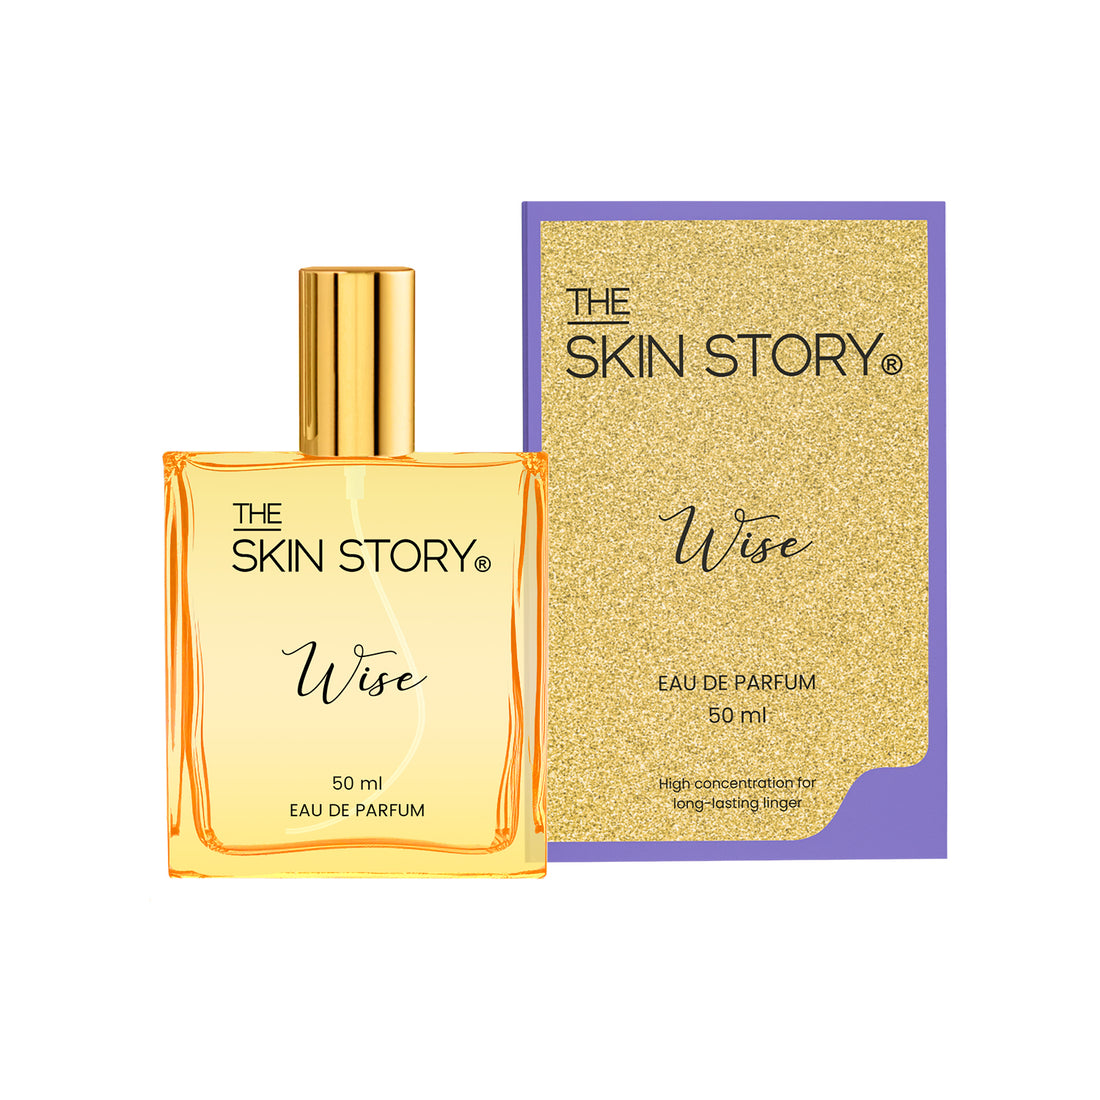 The Skin Story Wise, 50ml